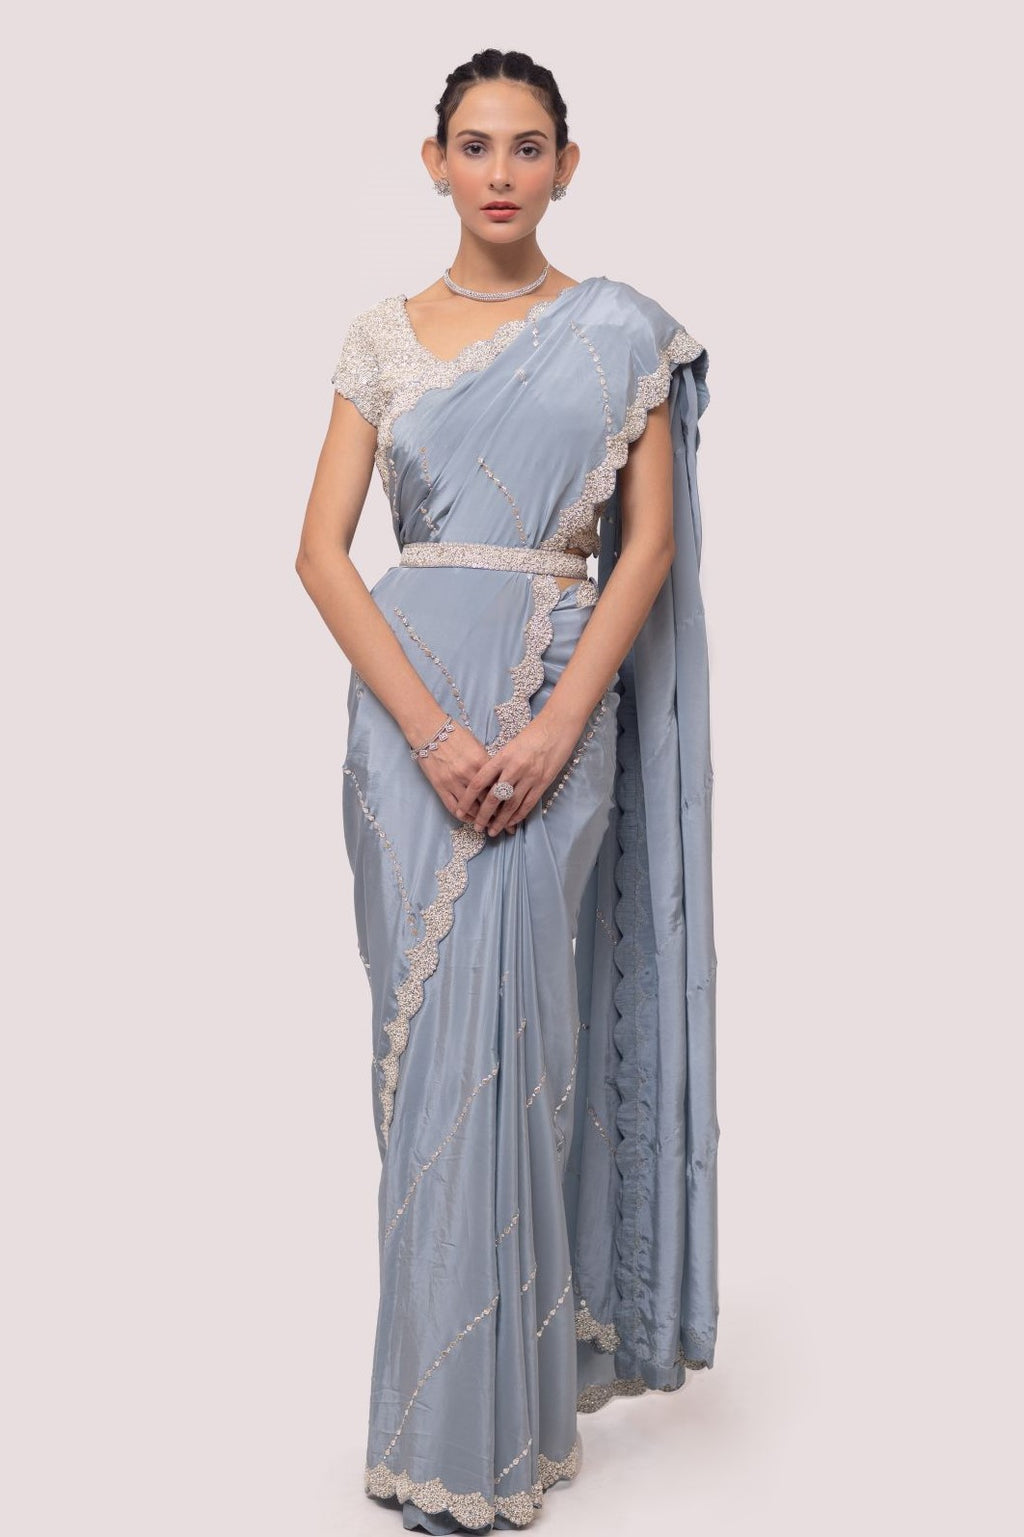 Shop blue crepe saree featuring Cheed, sequin, and cut dana work, embroidered sleeves blouse detailing is a perfect choice for parties! It comes with a designer saree blouse. Make a fashion statement at weddings with stunning designer sarees, embroidered sarees with blouses, wedding sarees, and handloom sarees from Pure Elegance Indian fashion store in the USA.